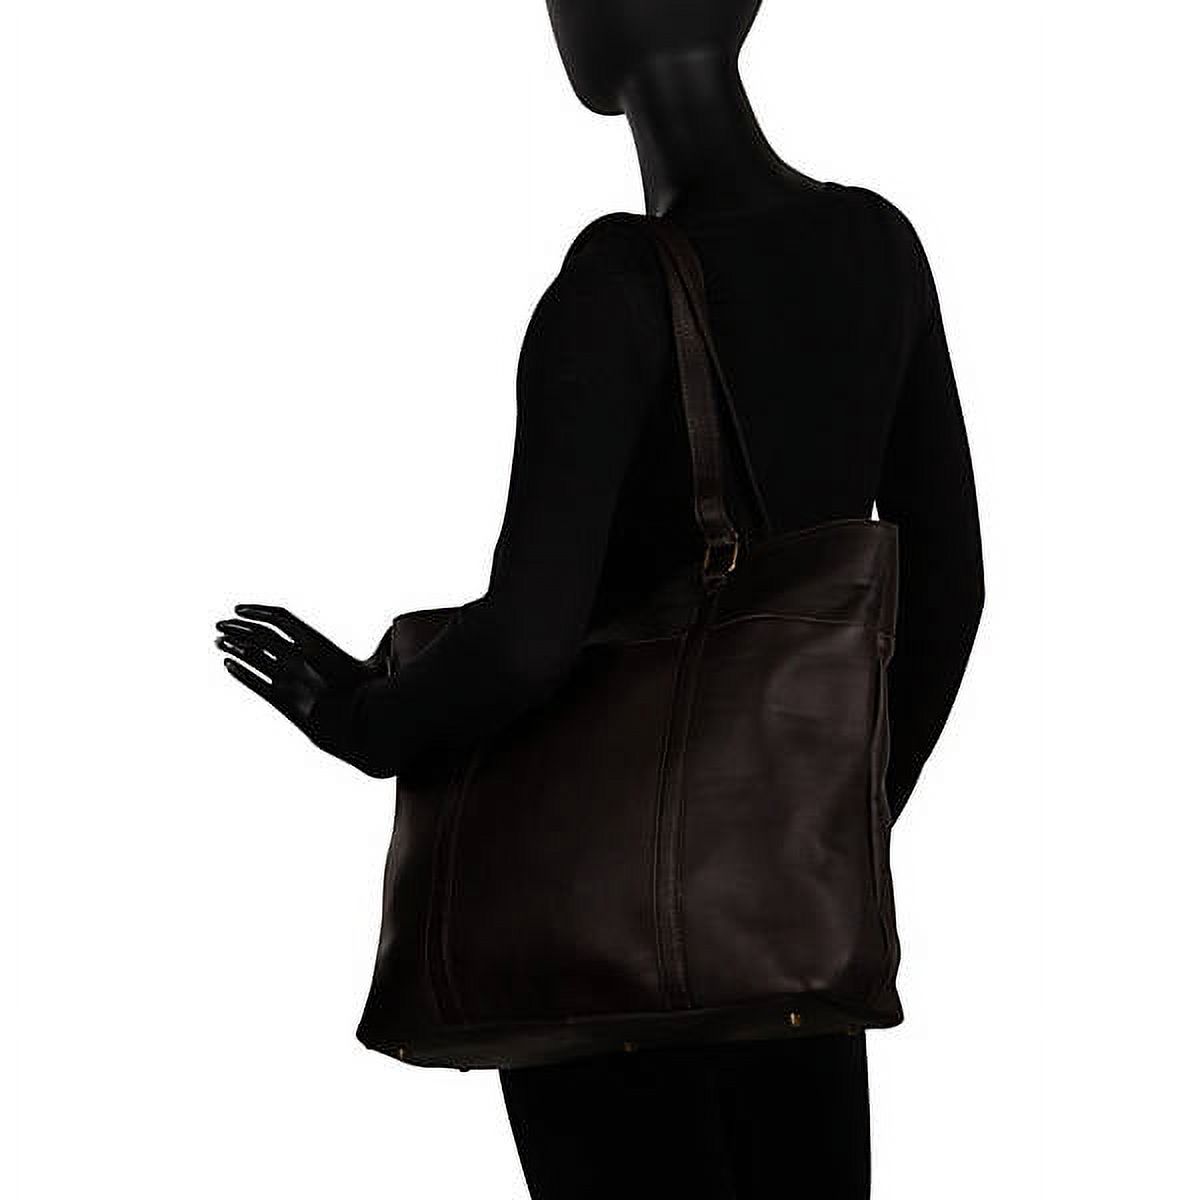 Le Donne Leather Women's Laptop Tote TR-1063 - image 4 of 4